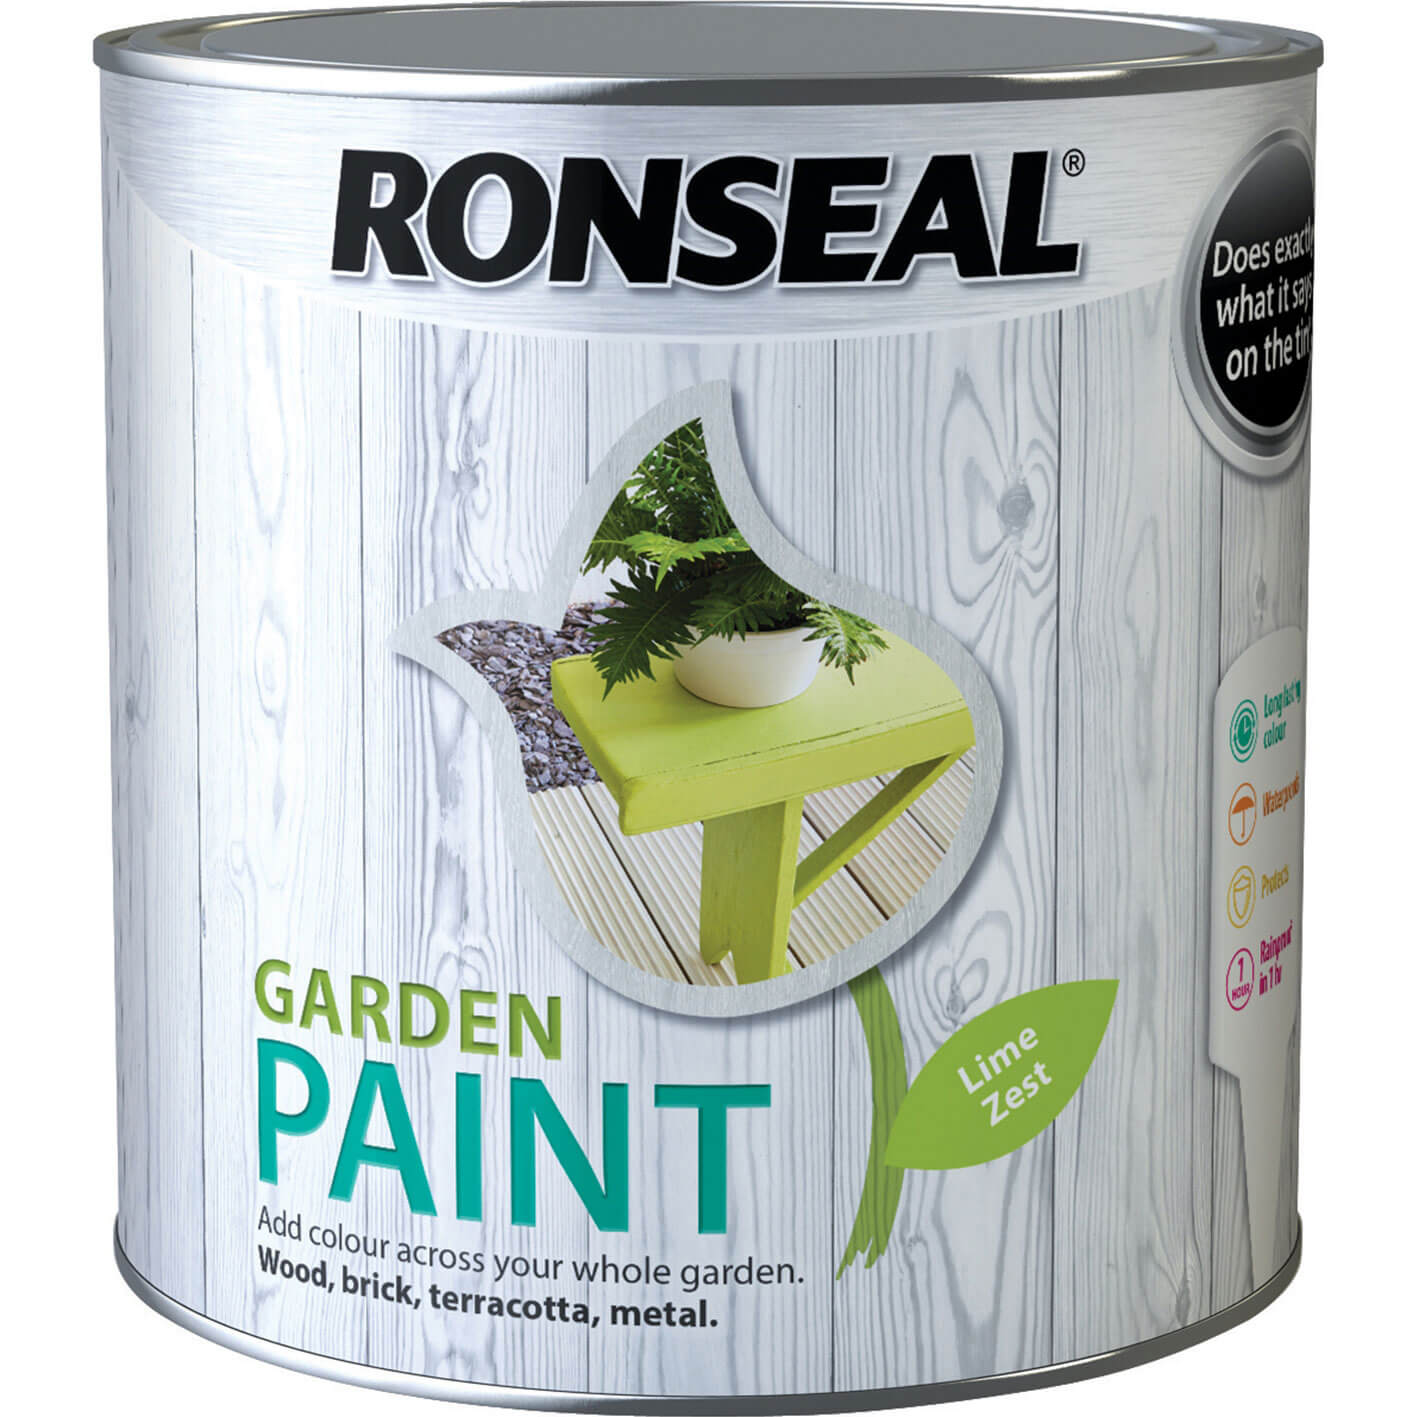 Image of Ronseal General Purpose Garden Paint Lime Zest 2.5l